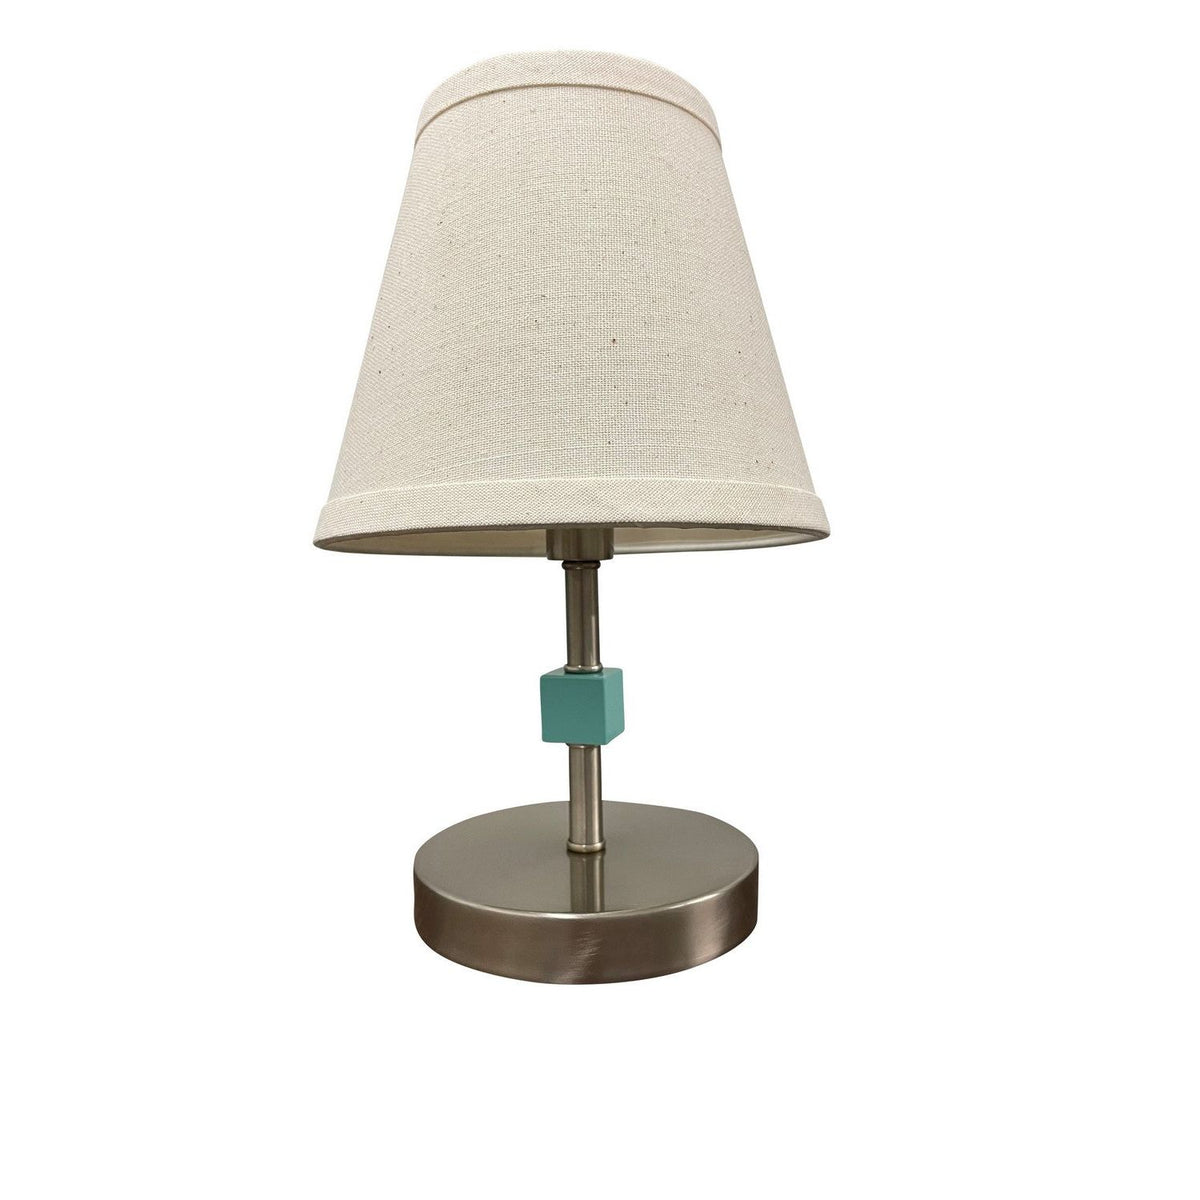 House of Troy - B203-SN/MT - One Light Accent Lamp - Bryson - Satin Nickel/Mint